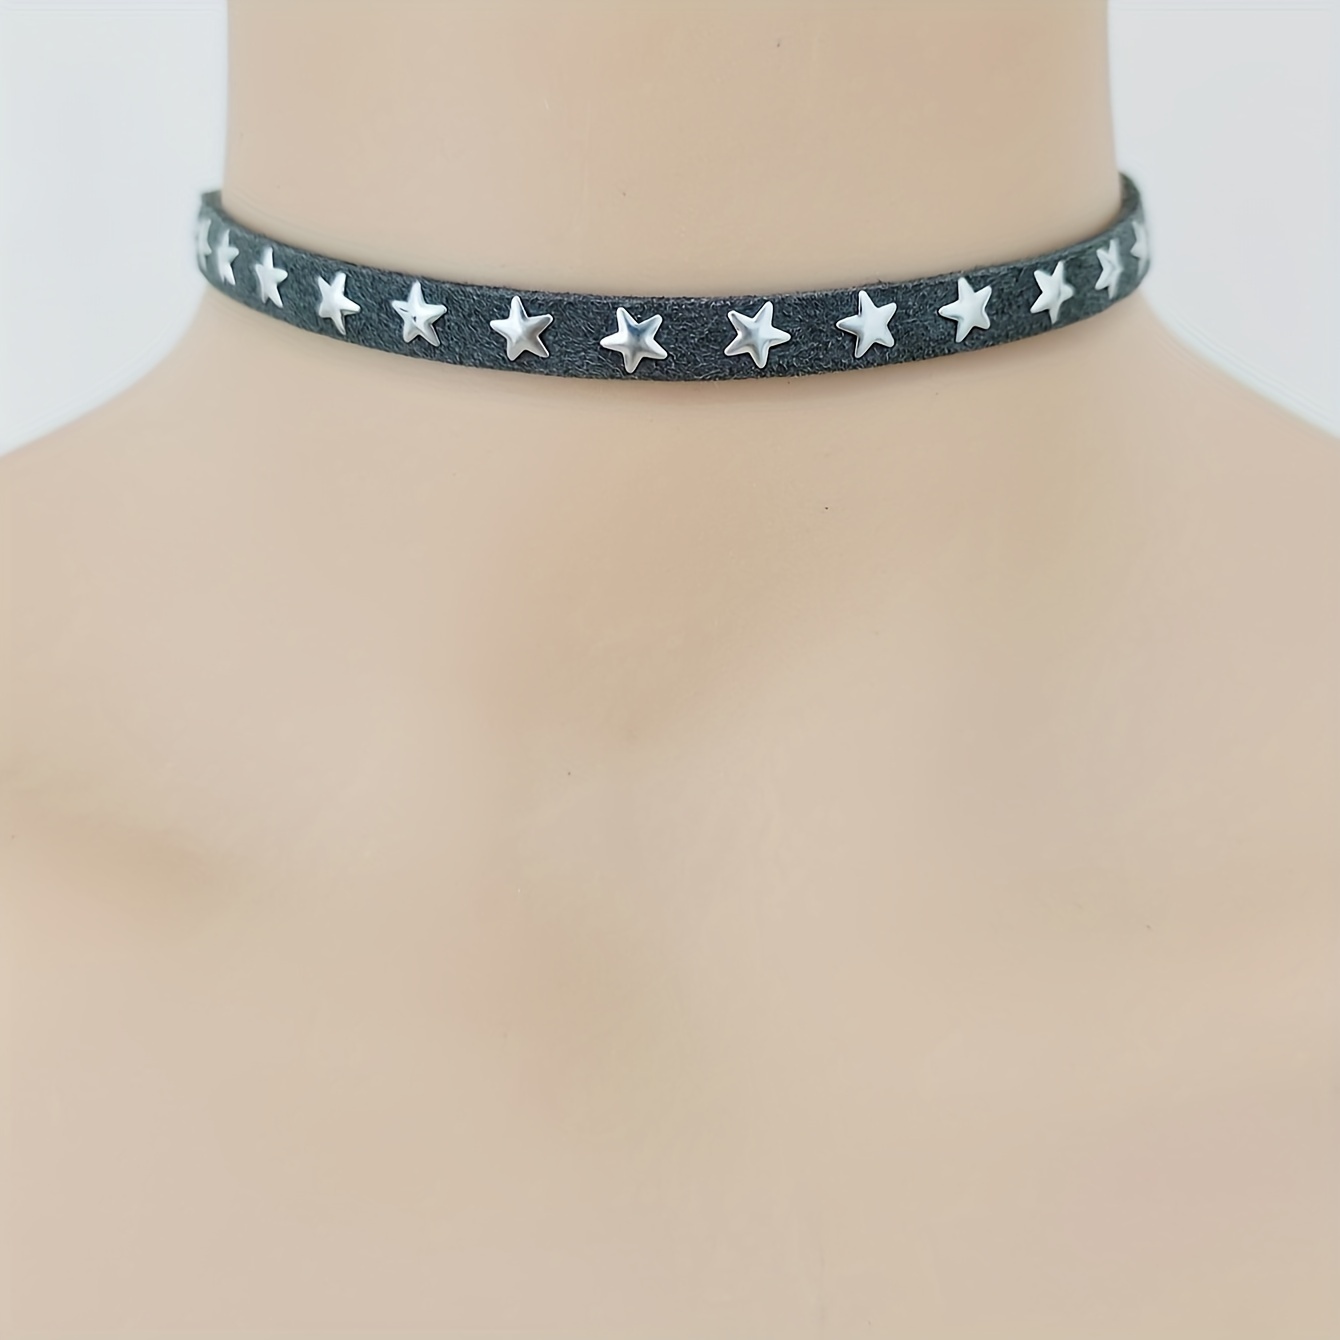 Punk Star Choker Collar Necklace, Retro Gothic Short Neck Jewelry Fiber Necklace Club Party Favors